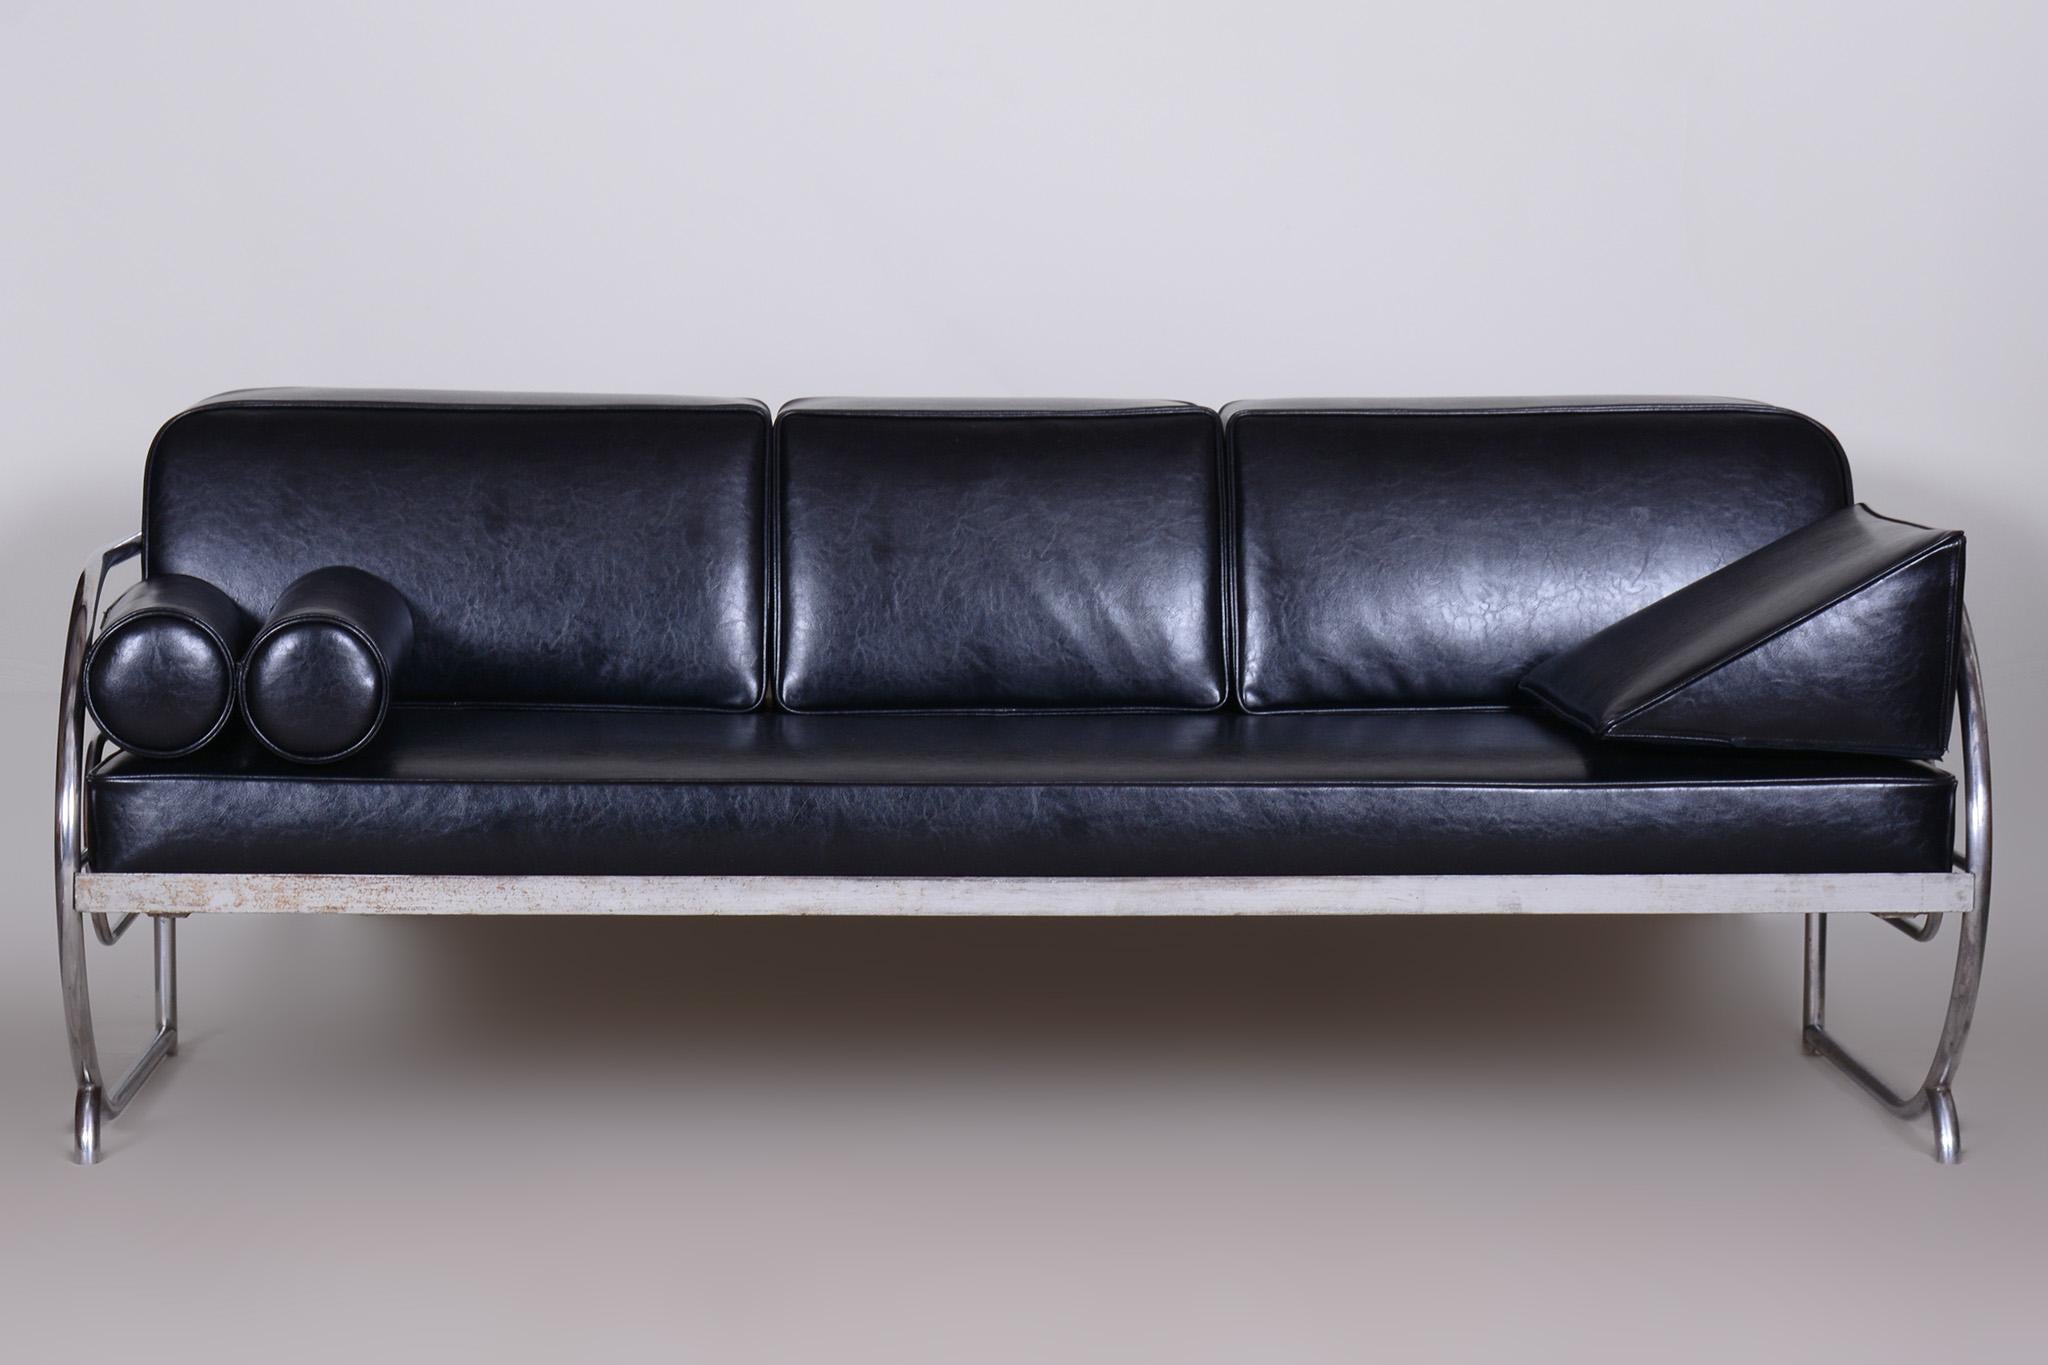 Restored Bauhaus-style sofa with chrome tubular steel frame.

Manufactured by Robert Slezák in the 1930s.
The sofa is upholstered with high-quality black leather.
Source: Czechia (Czechoslovakia).